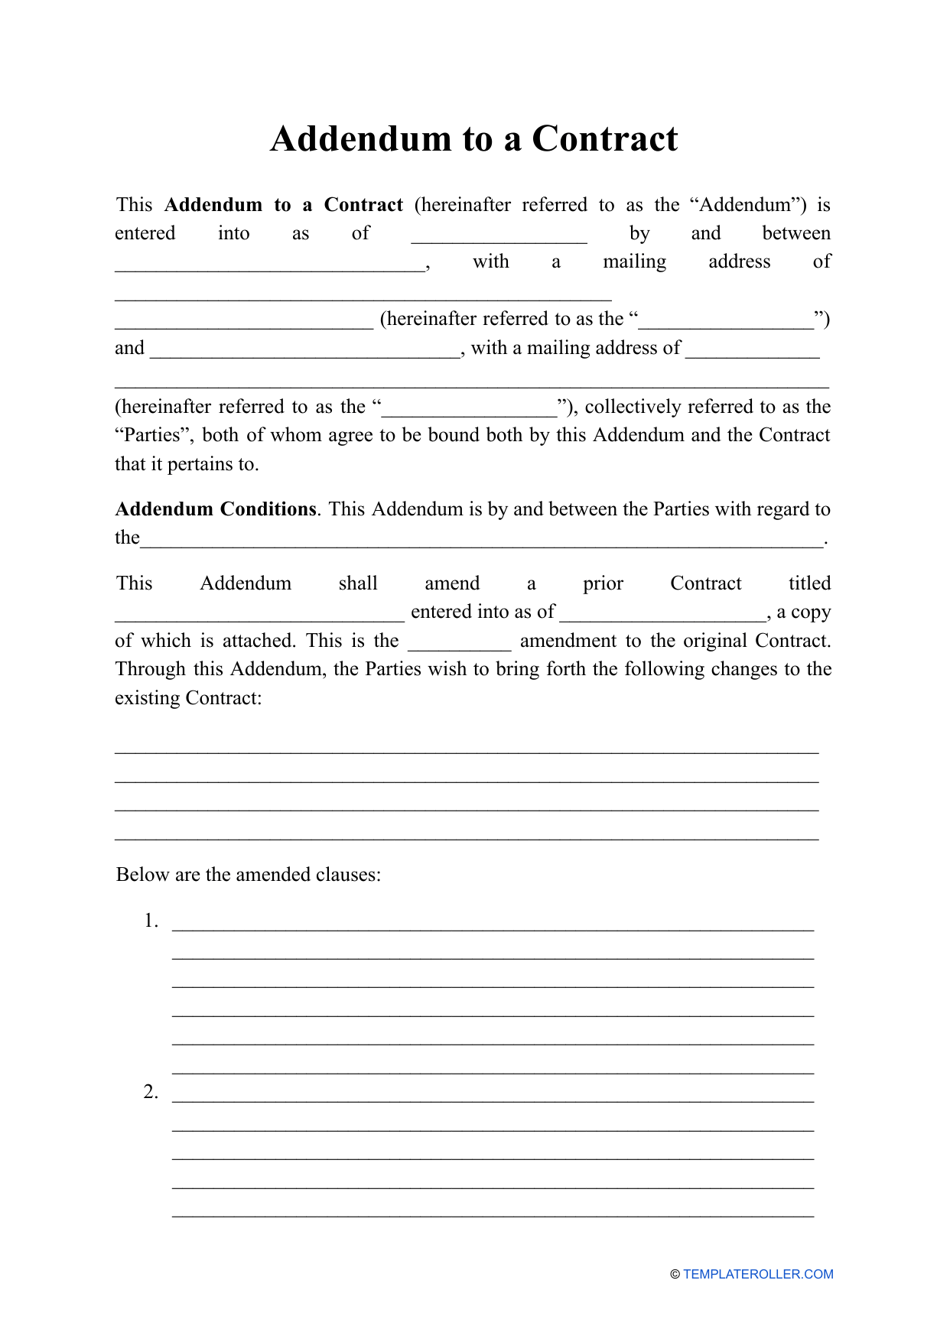 Addendum to a Contract Download Printable PDF  Templateroller